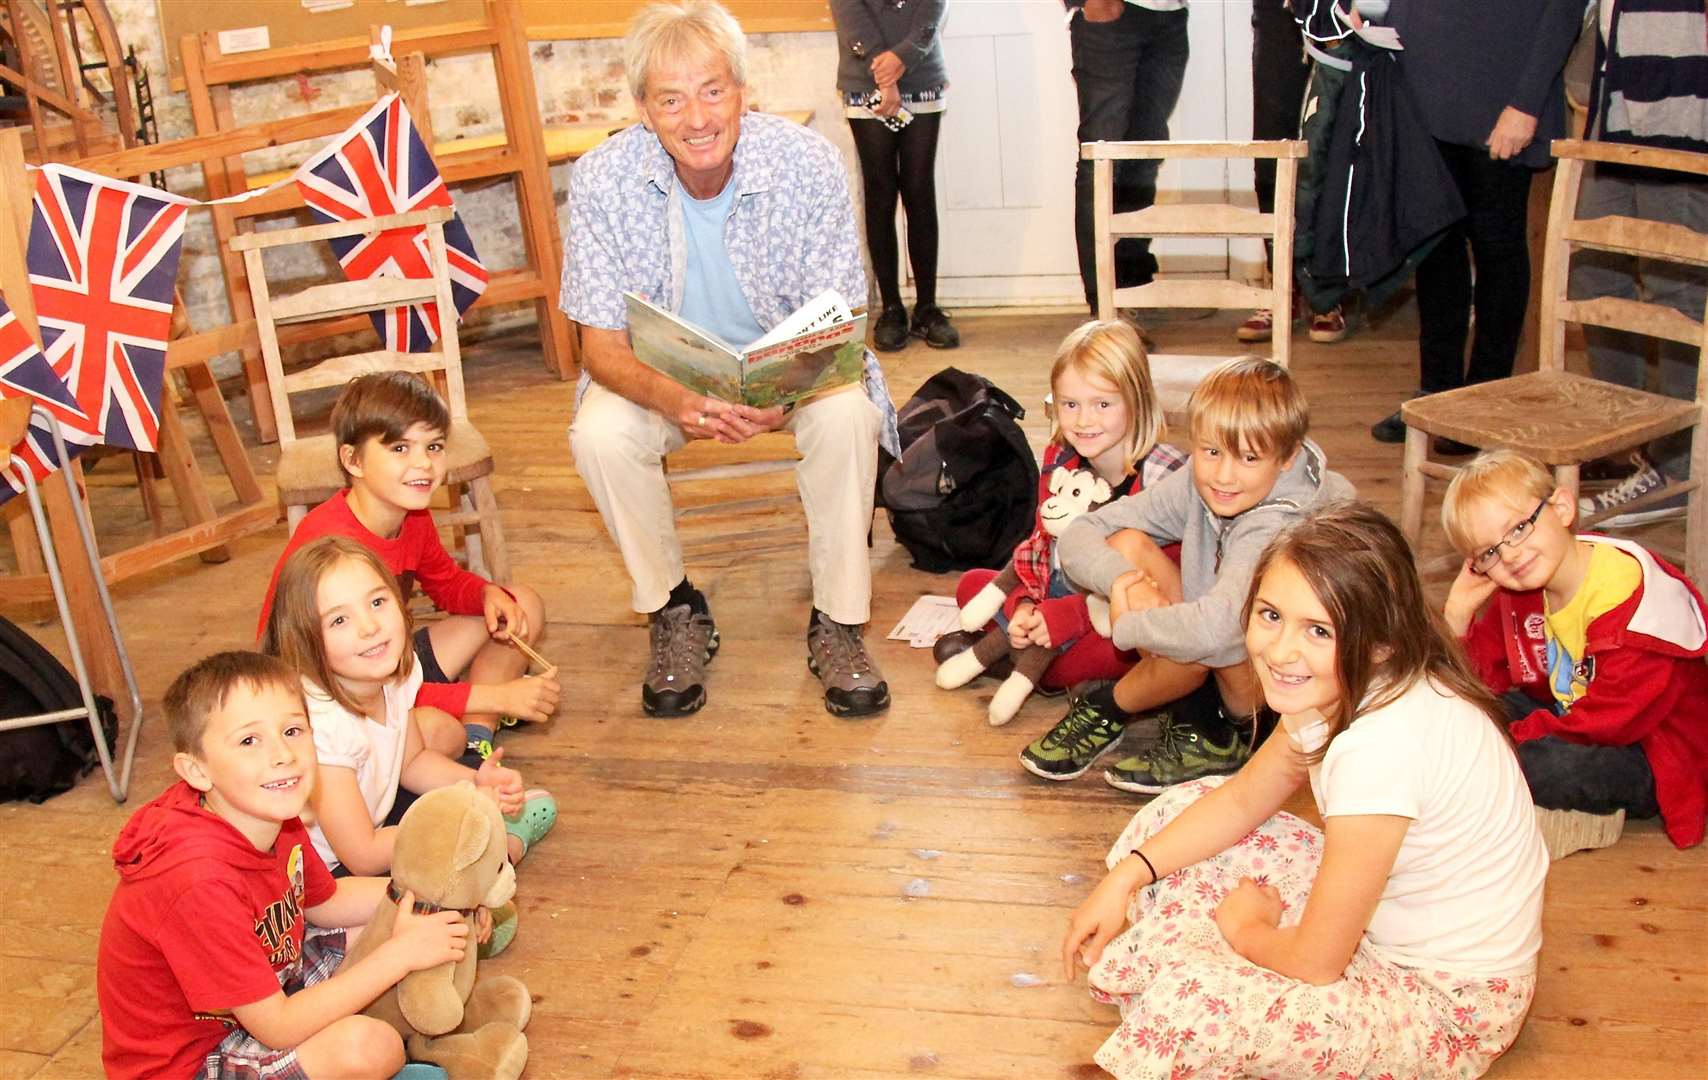 Poet John Rice with children in Cranbrook's Union Windmill at the last event